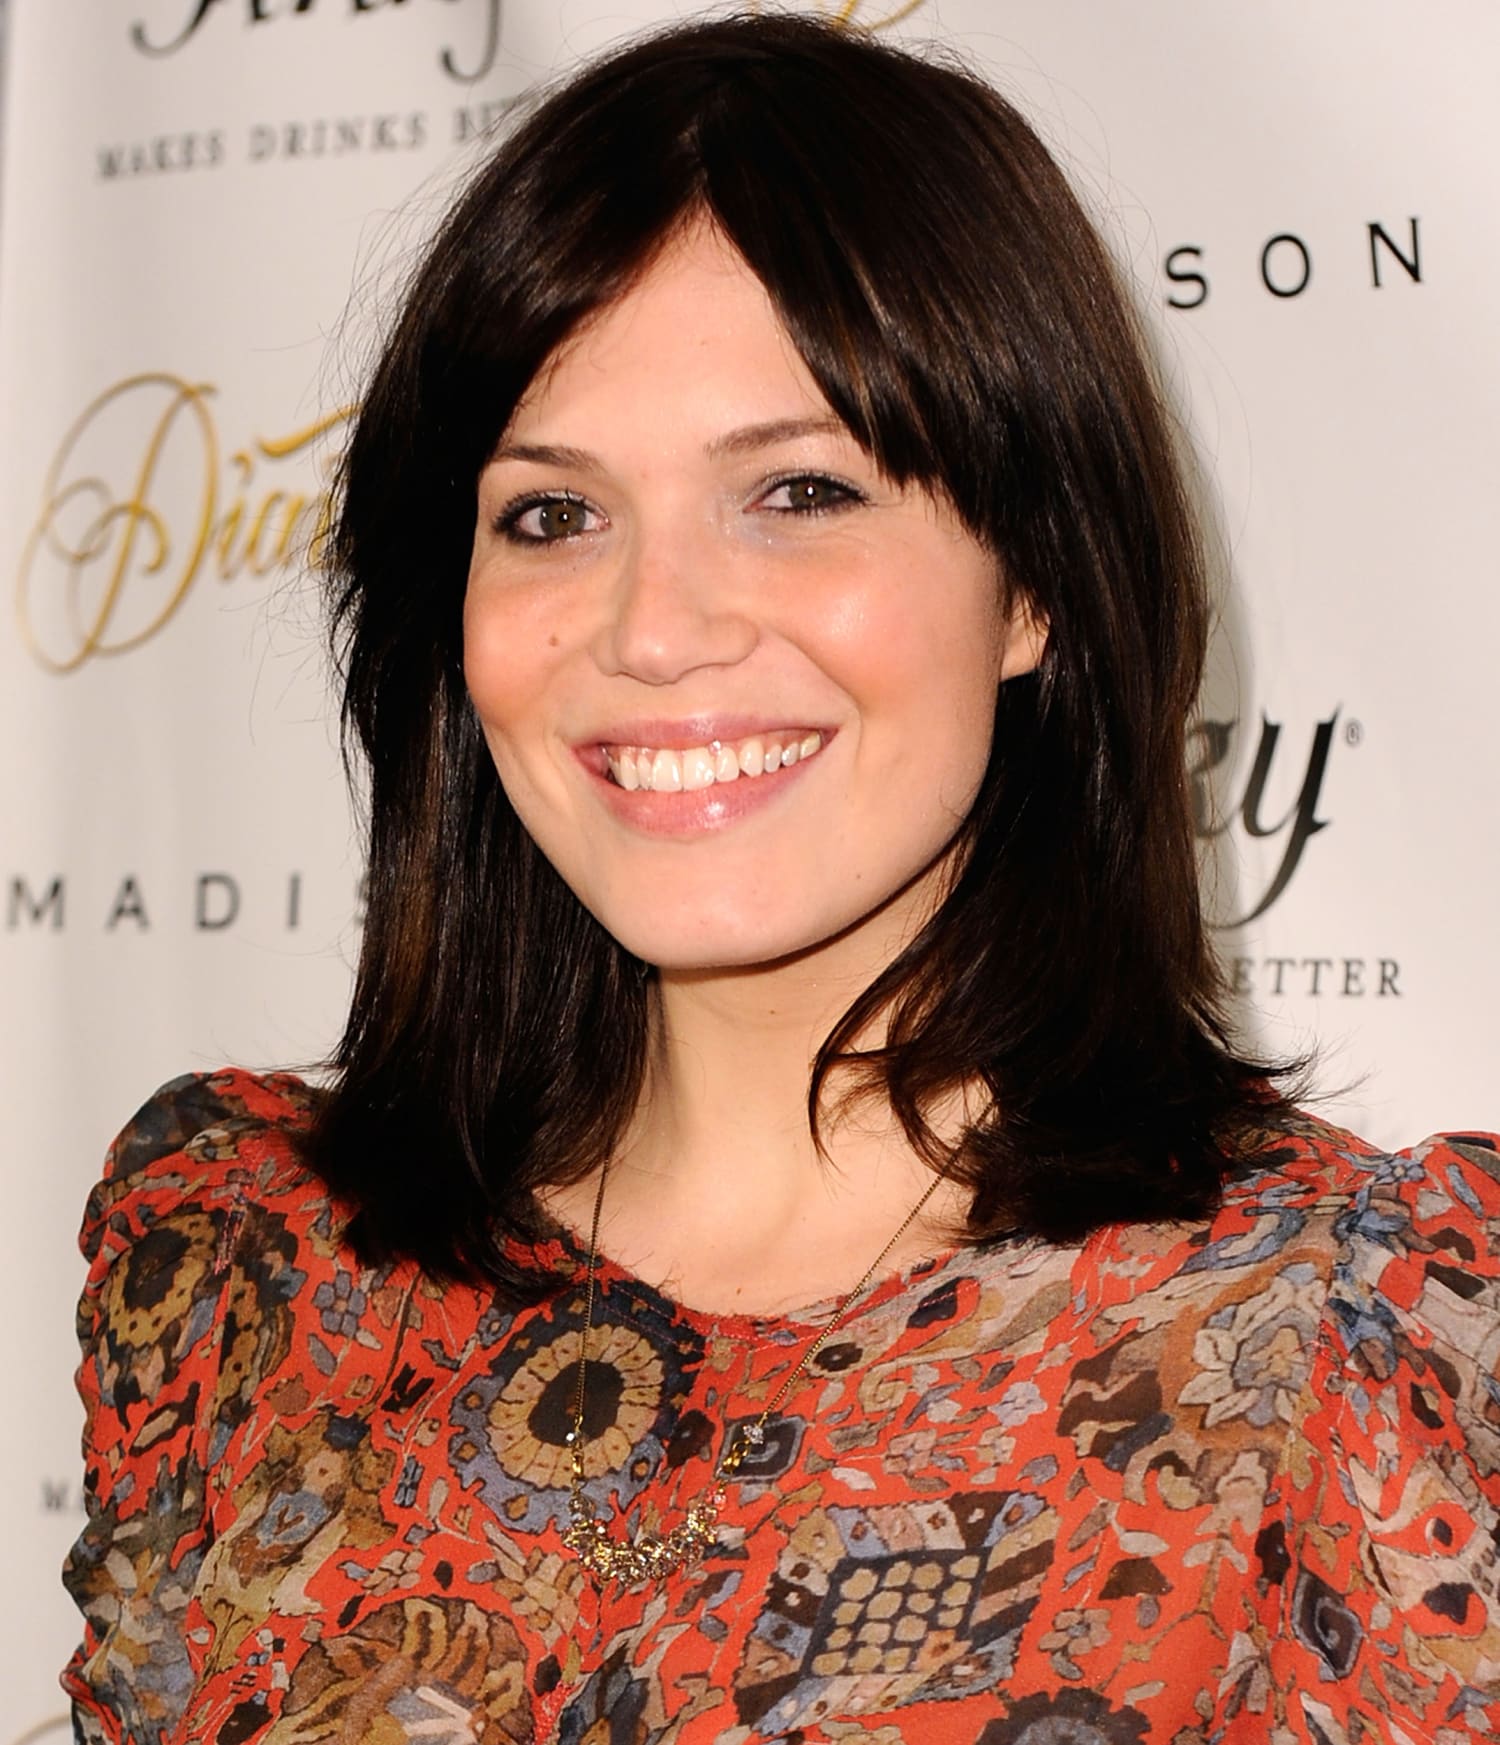 This Is Us' star Mandy Moore reveals blond hair on Instagram